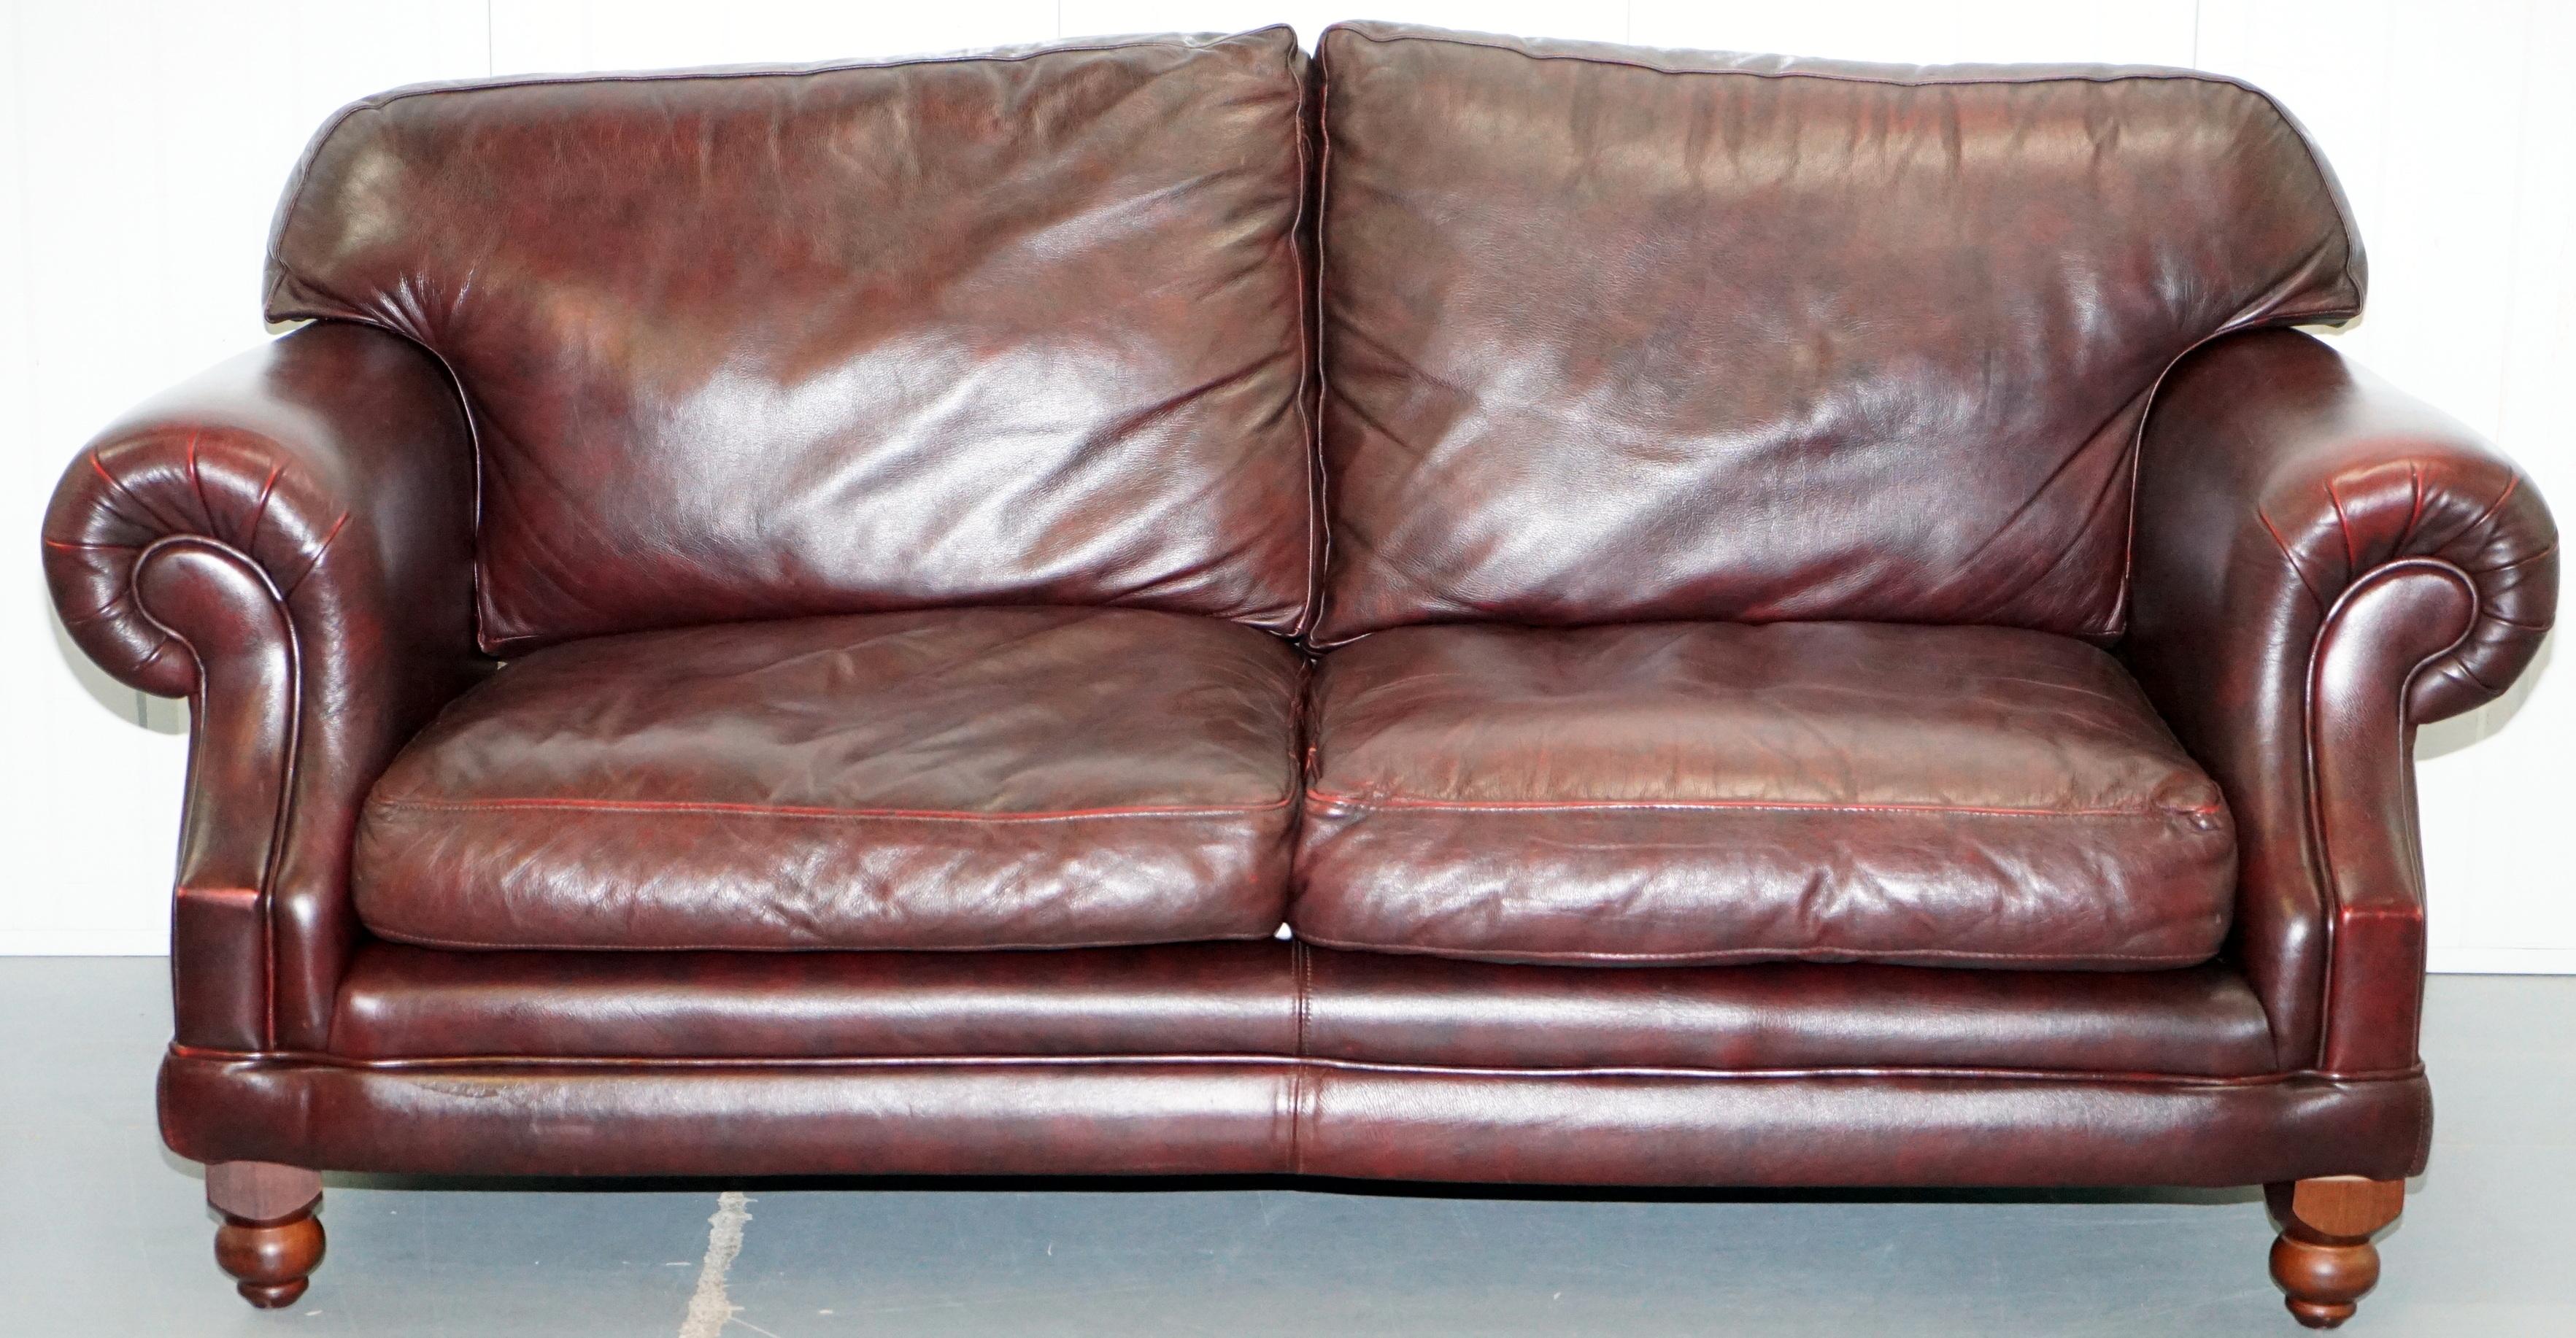 We are delighted to offer for sale 1 of 2 Thomas Lloyd Consort oxblood leather contemporary sofas

A good looking and well piece, the leather upholstery is thick, the base and back cushions medium soft so very comfortable

We have deep cleaned